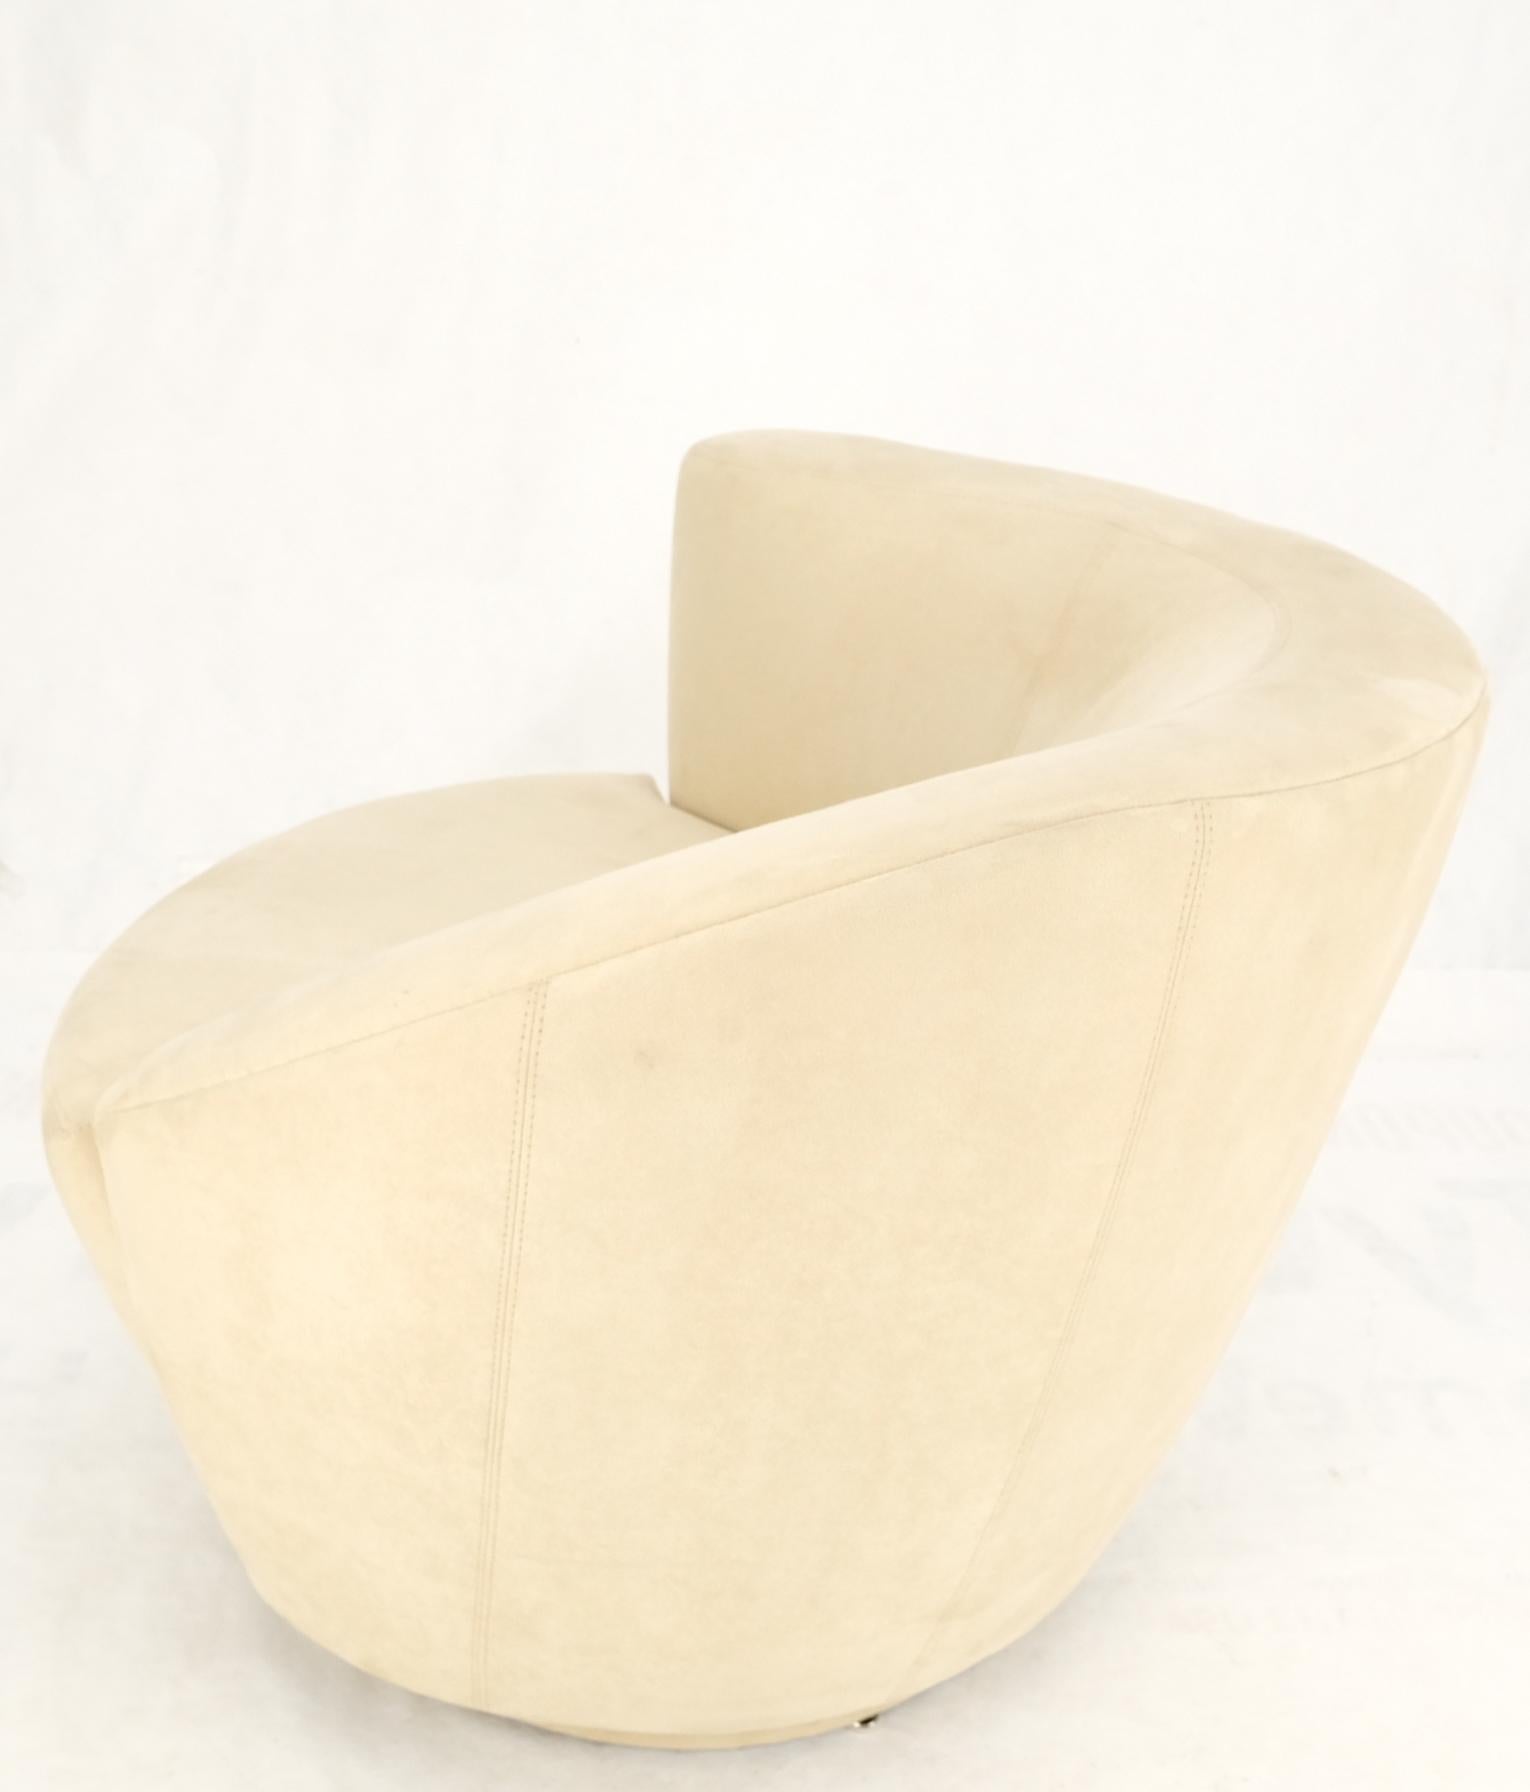 Beige Offwhite Alcantara Suede Corkscrew Nautilus Swivel Chairs Directional Mint For Sale 7